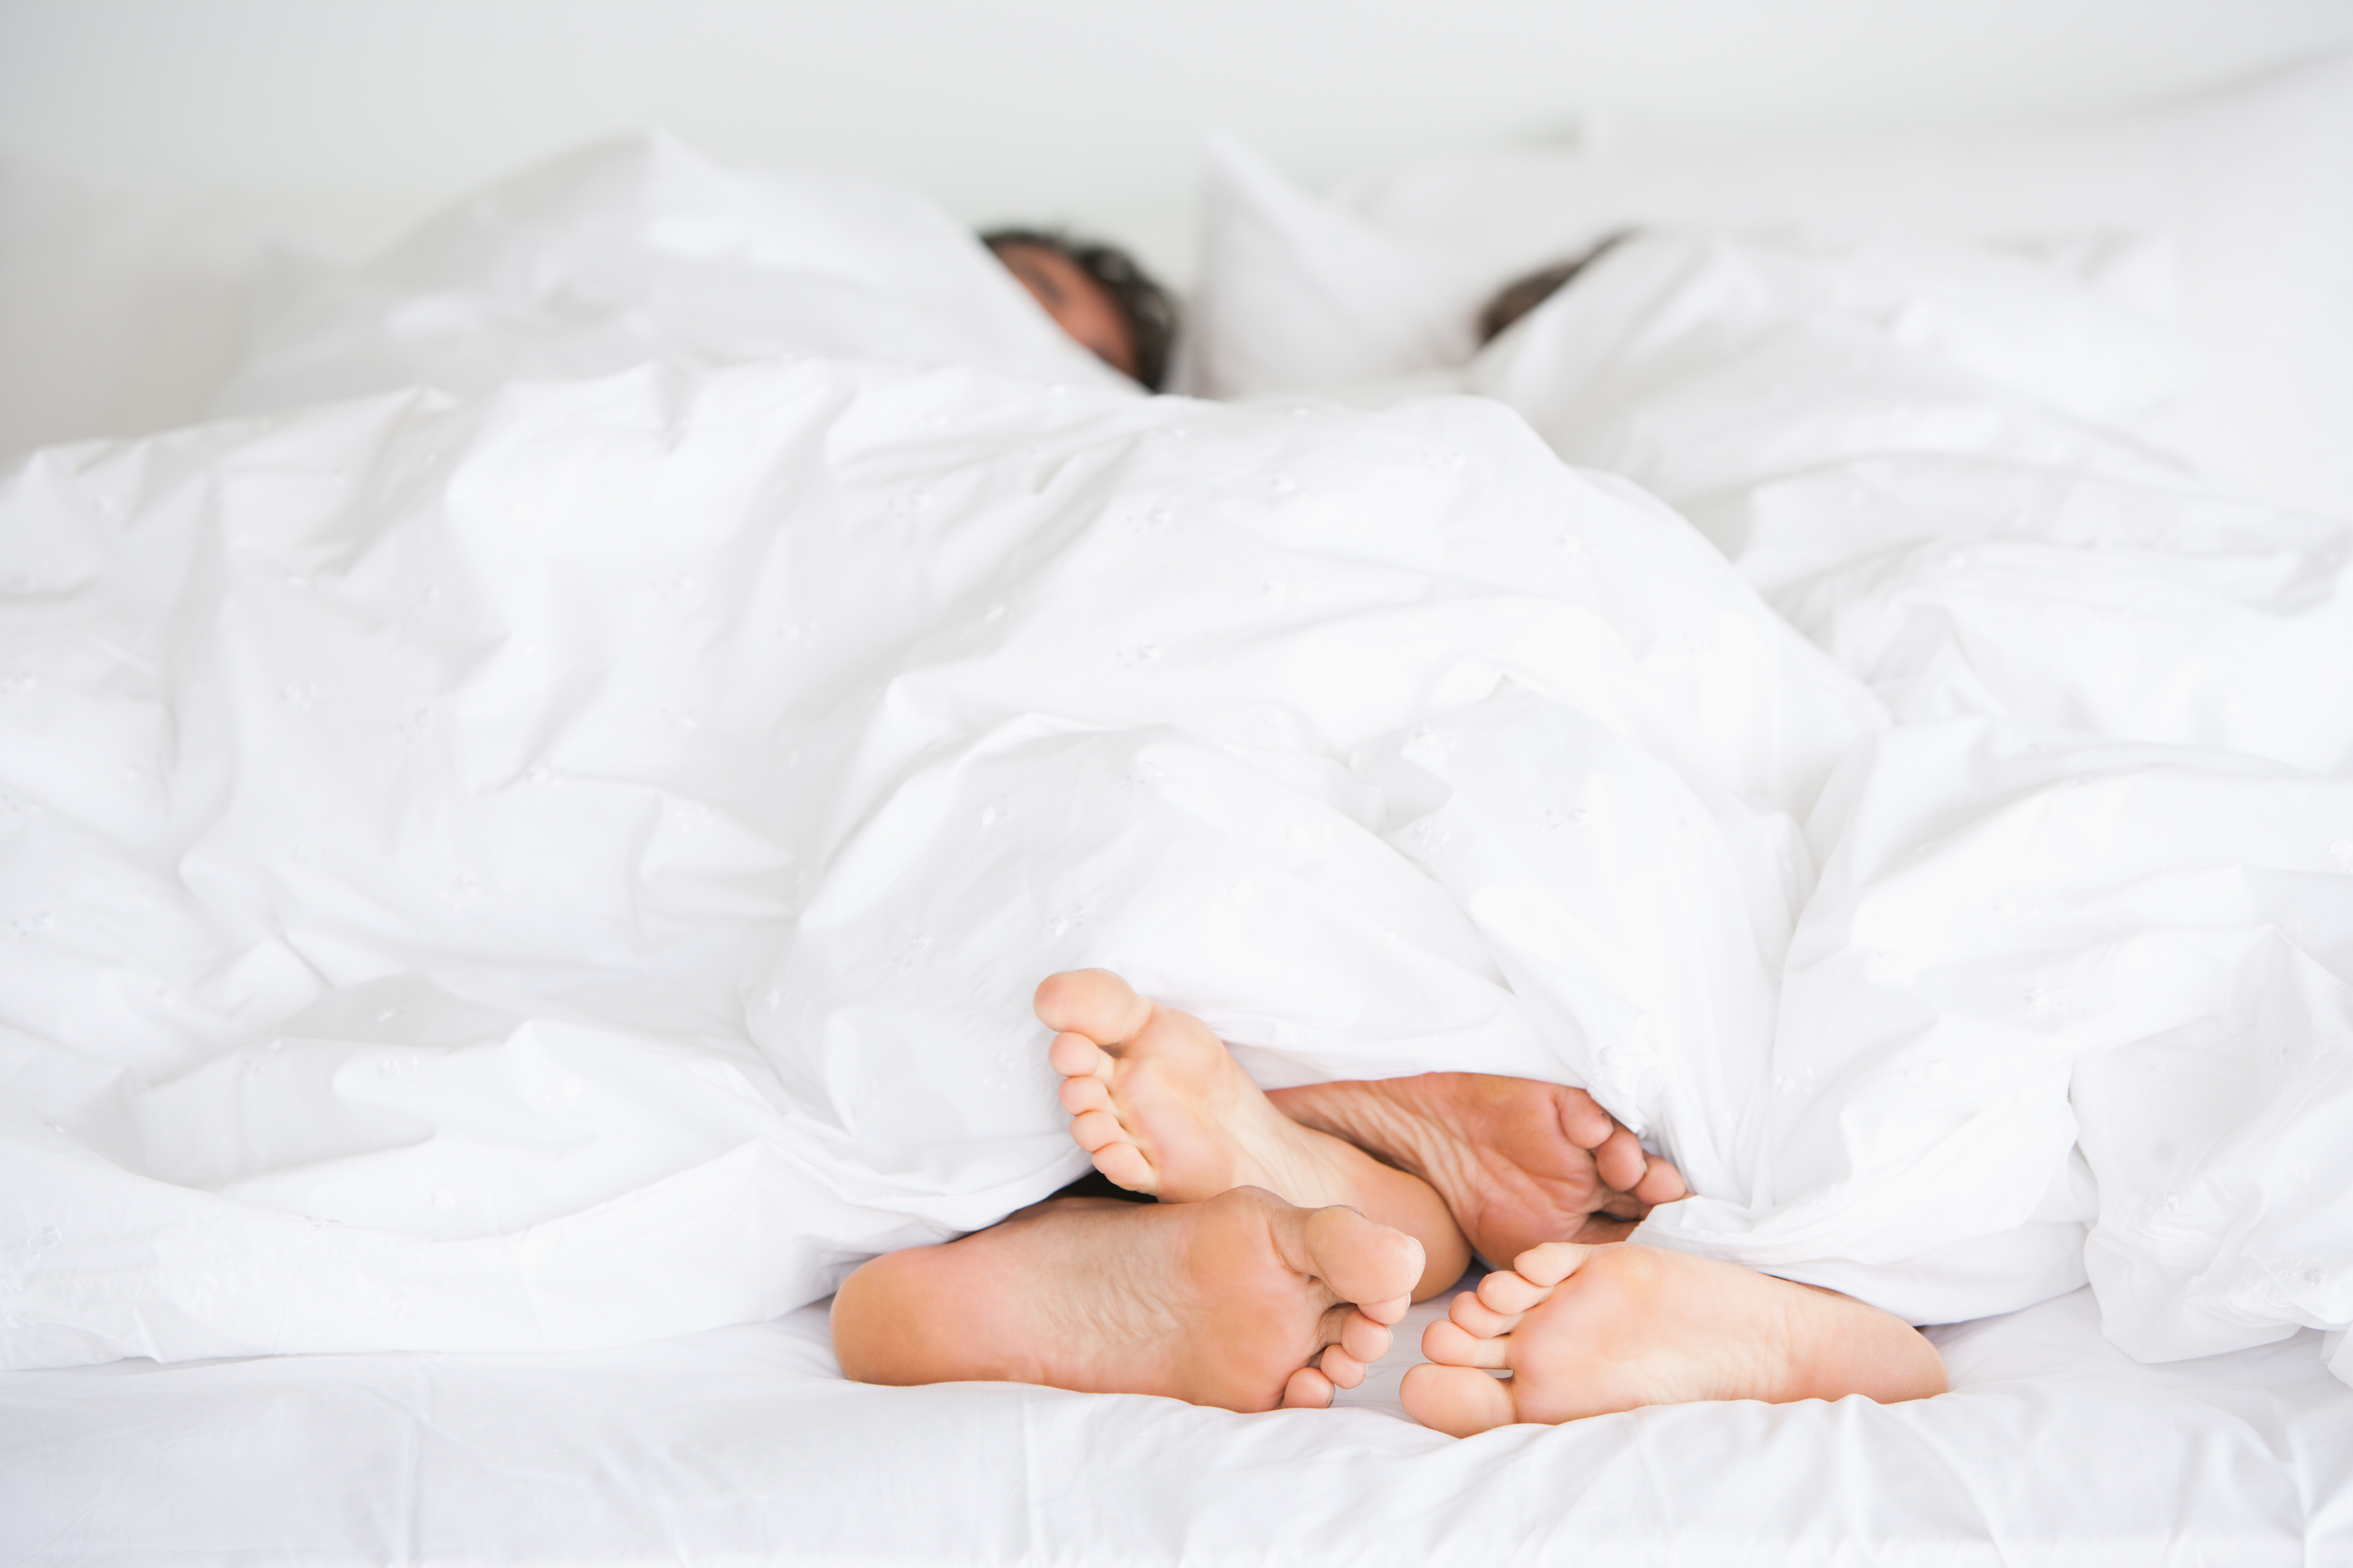 Two people&#x27;s feet sticking out from under a white duvet, suggesting intimacy